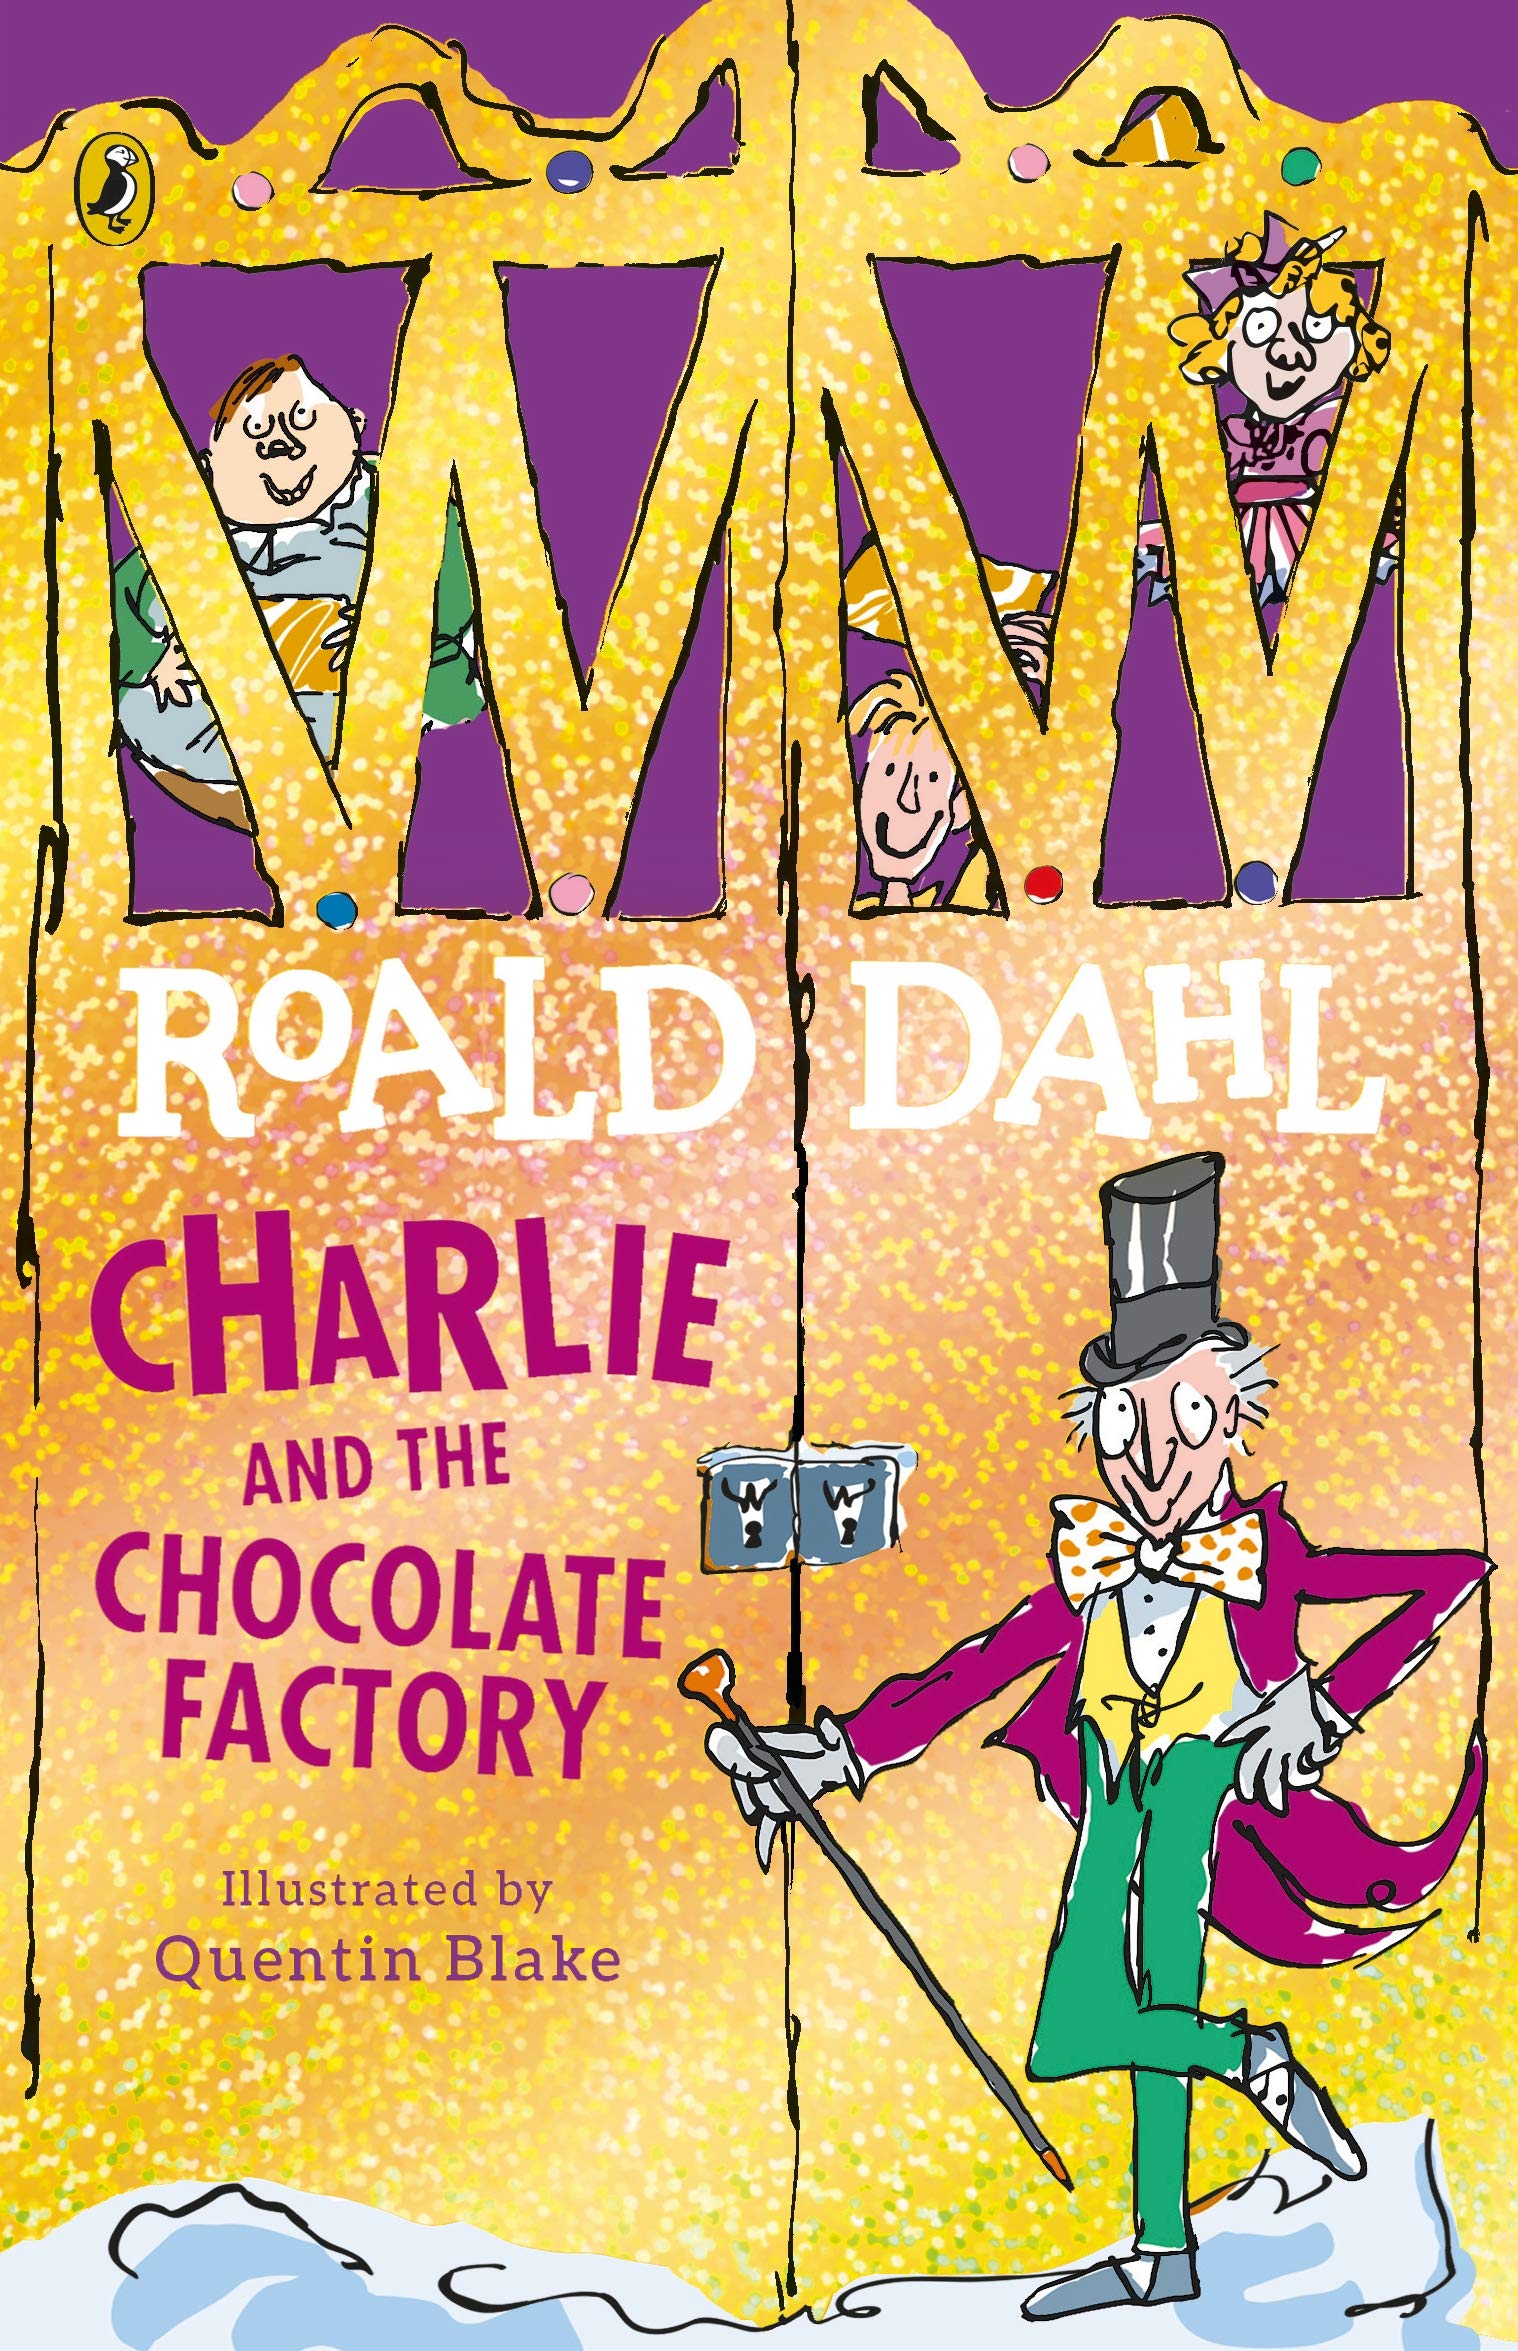 book report on charlie and the chocolate factory